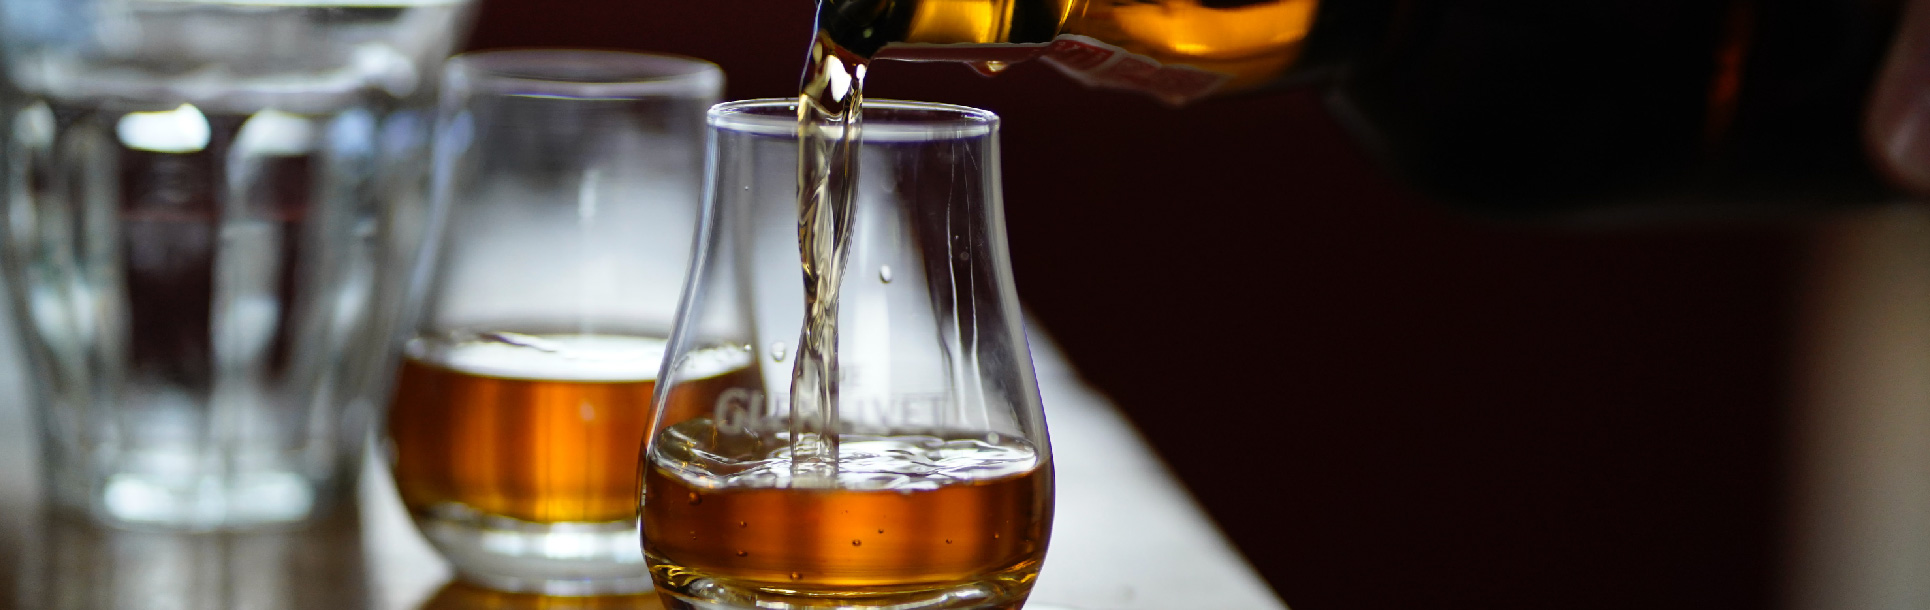 Bourbon being poured into a glass